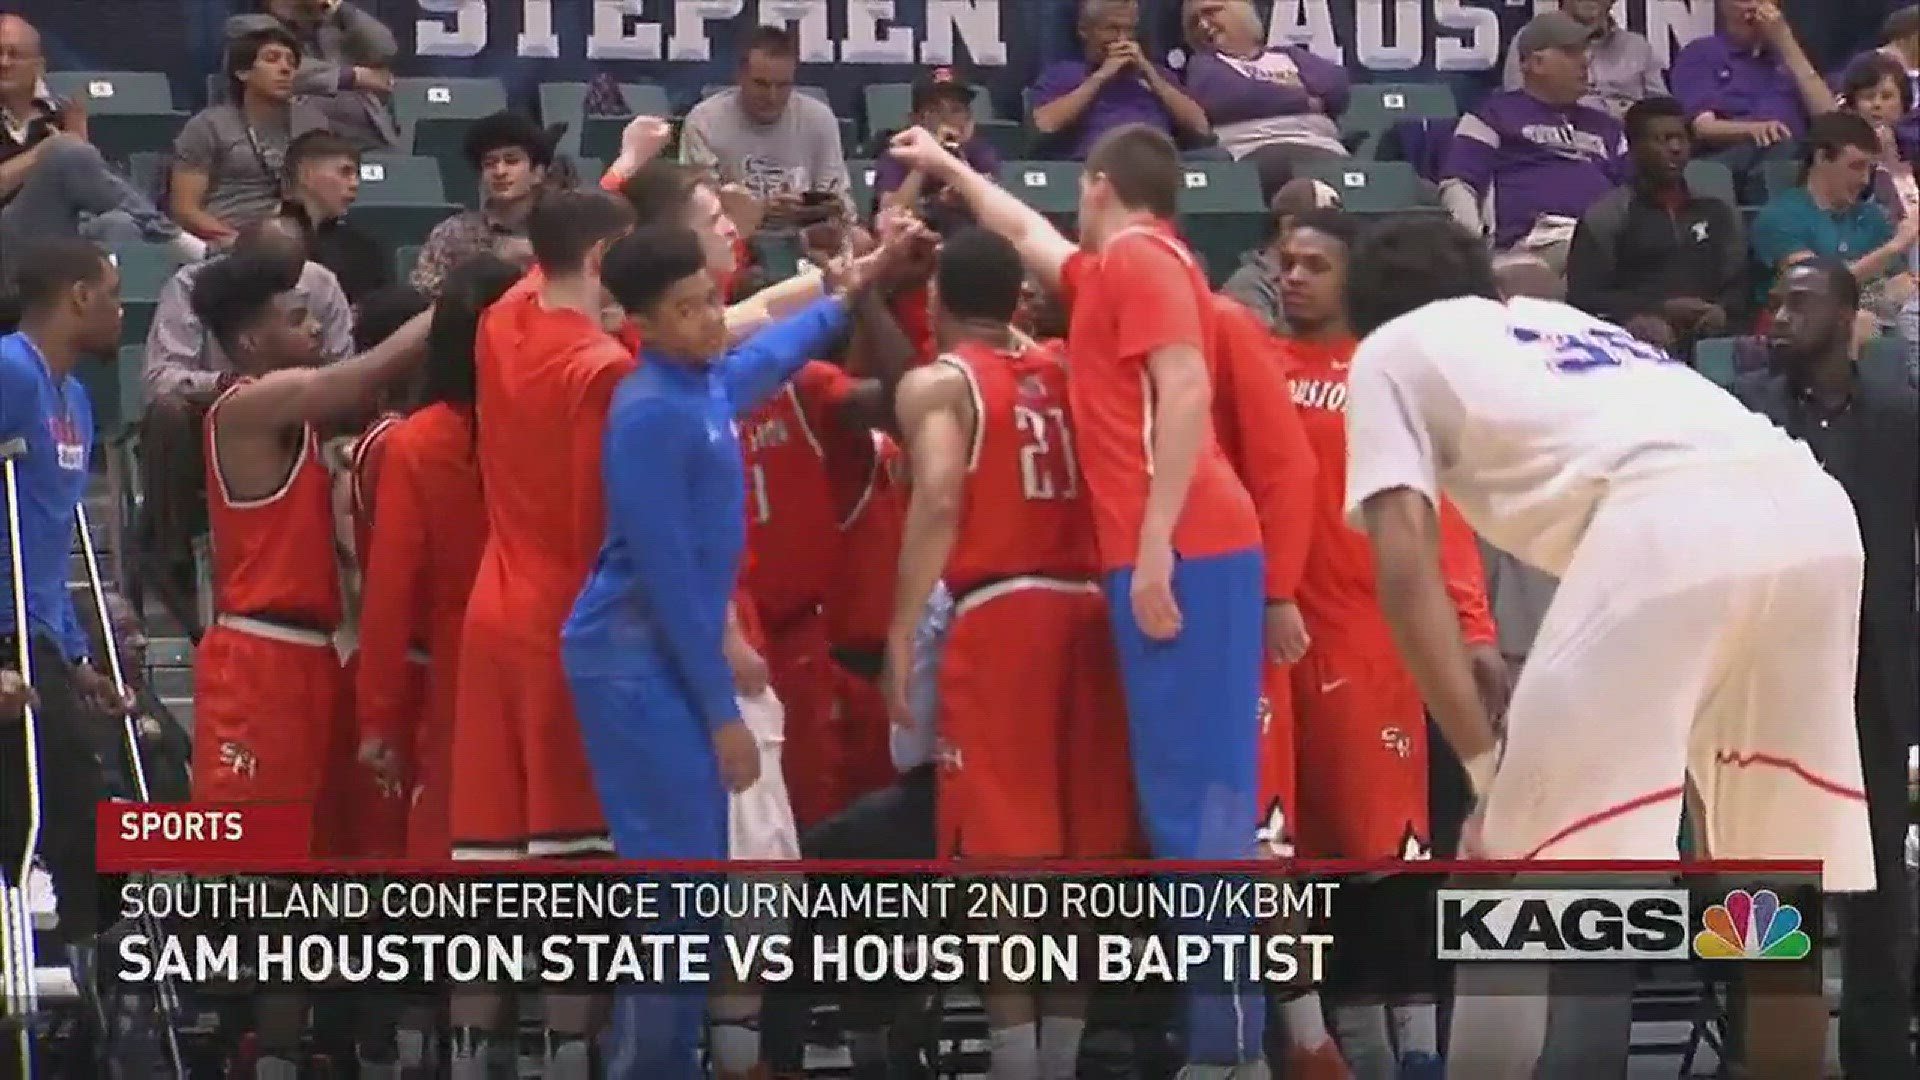 5-seed Sam Houston State defeated 4-seed Houston Baptist 63-59 in the second round of the Southland Conference Tournament on Thursday to advance to Friday's semifinals vs New Orleans.